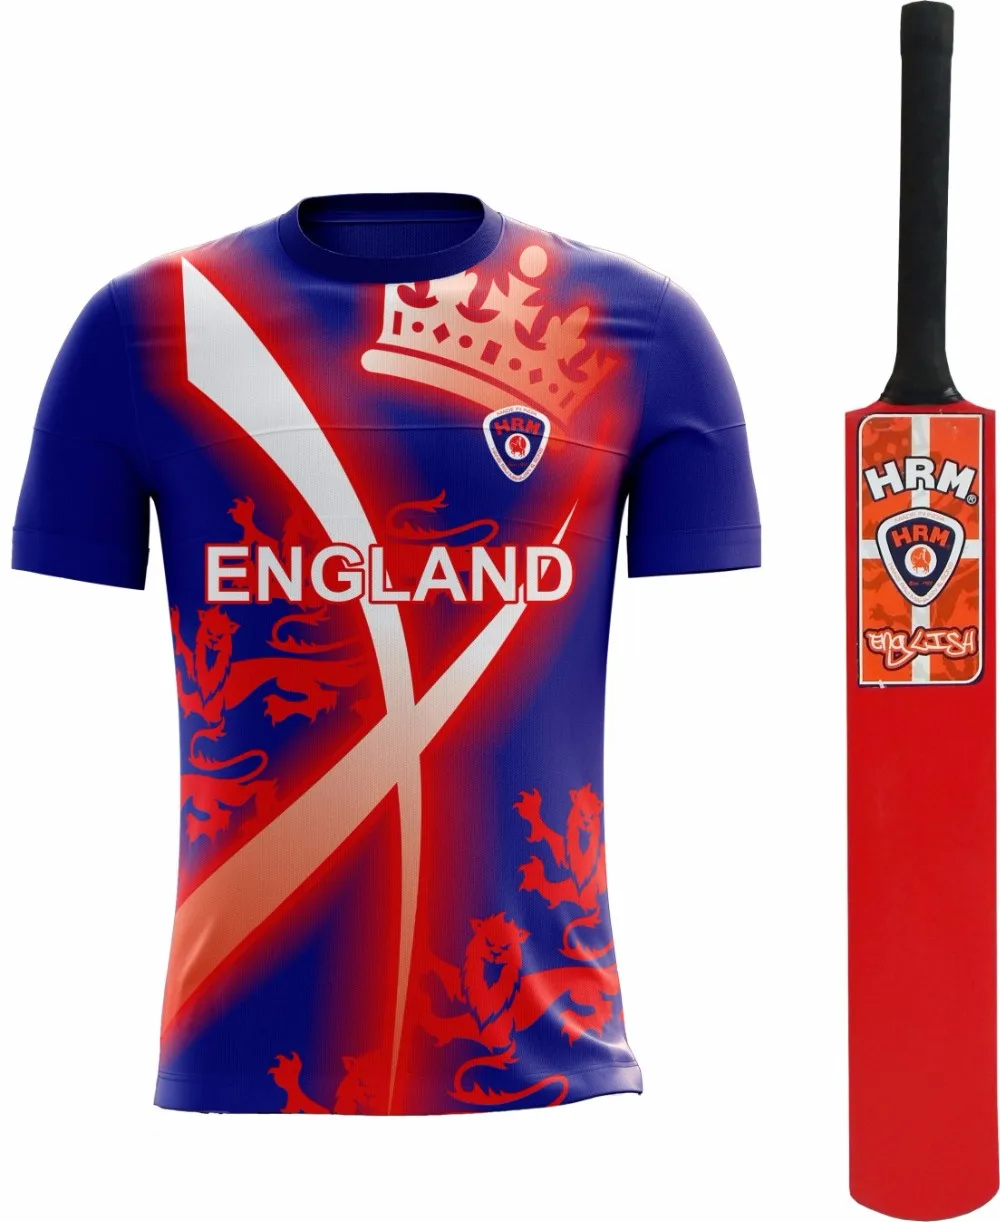 cricket t shirt with name